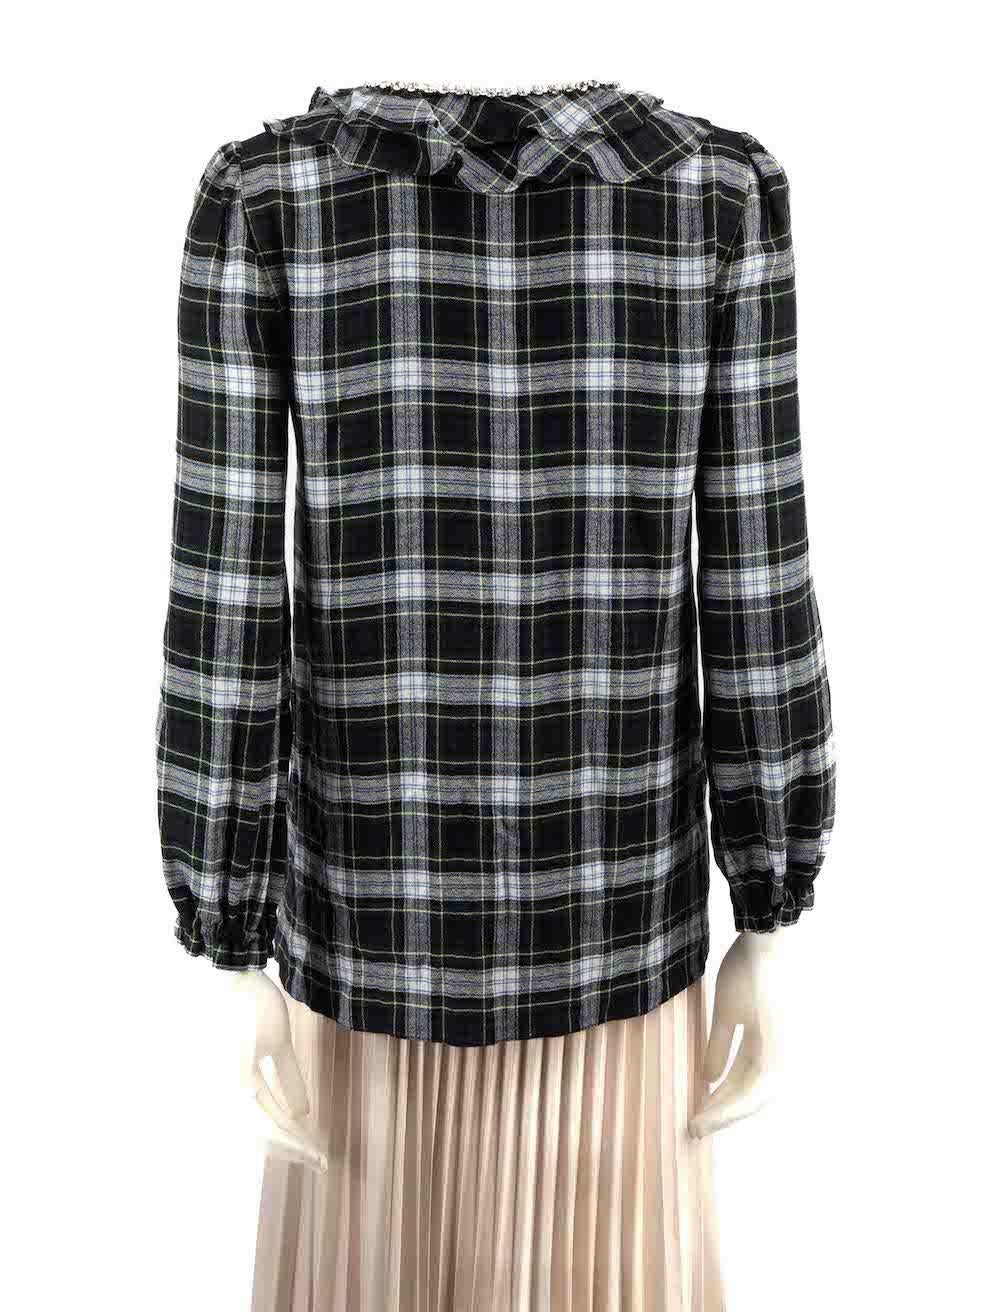 Moschino Boutique Moschino Tartan Pattern Gemstone Detail Top Size S In Good Condition For Sale In London, GB